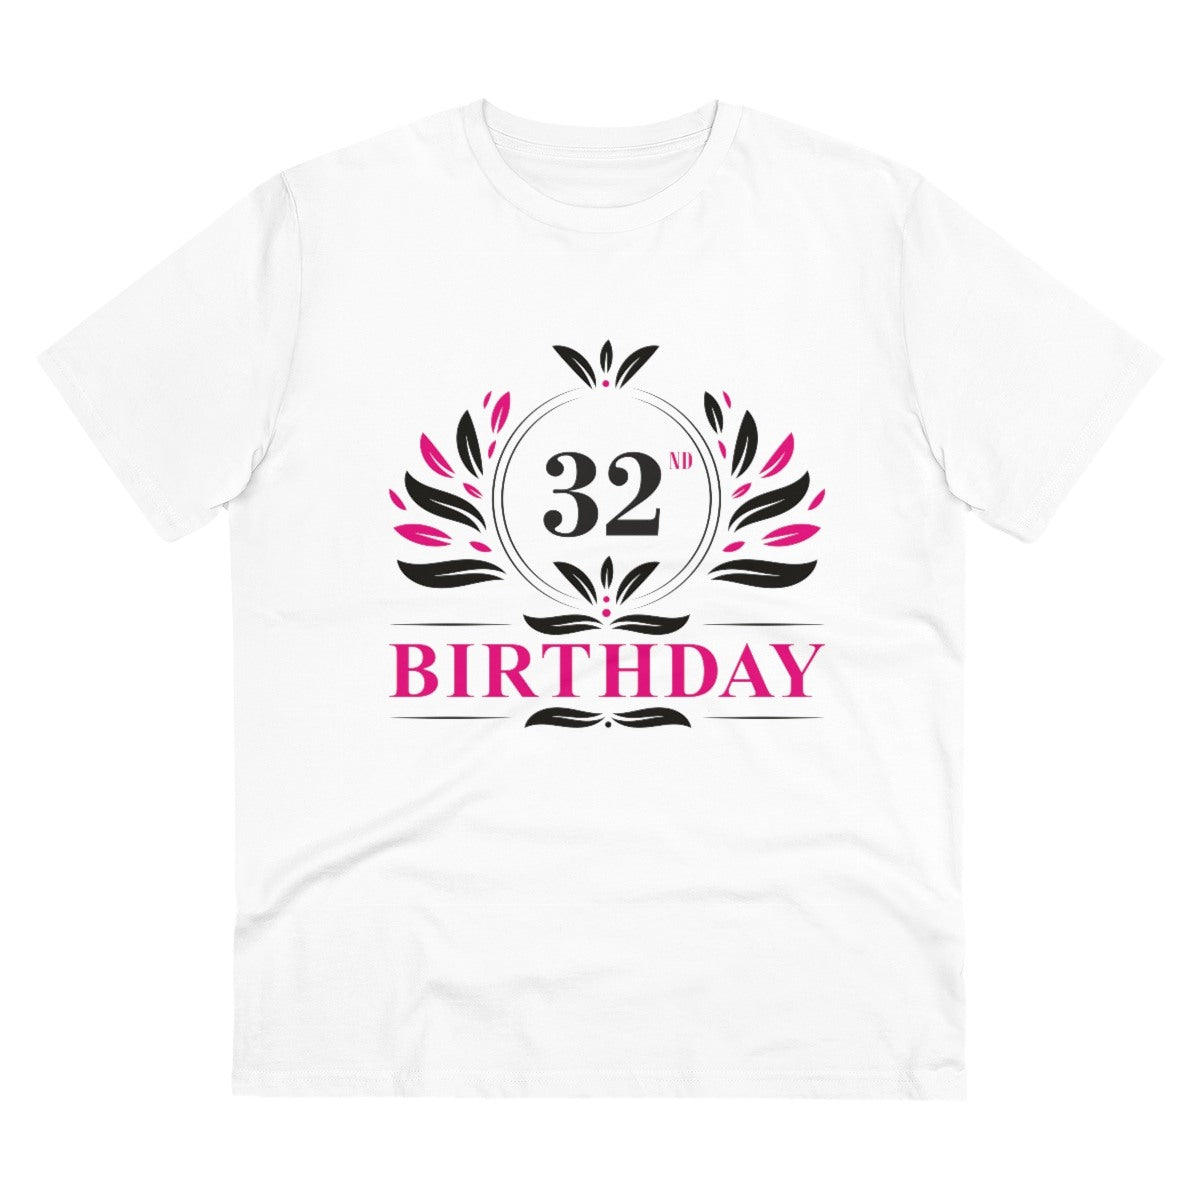 Men's PC Cotton 32nd Birthday Printed T Shirt (Color: White, Thread Count: 180GSM) - GillKart